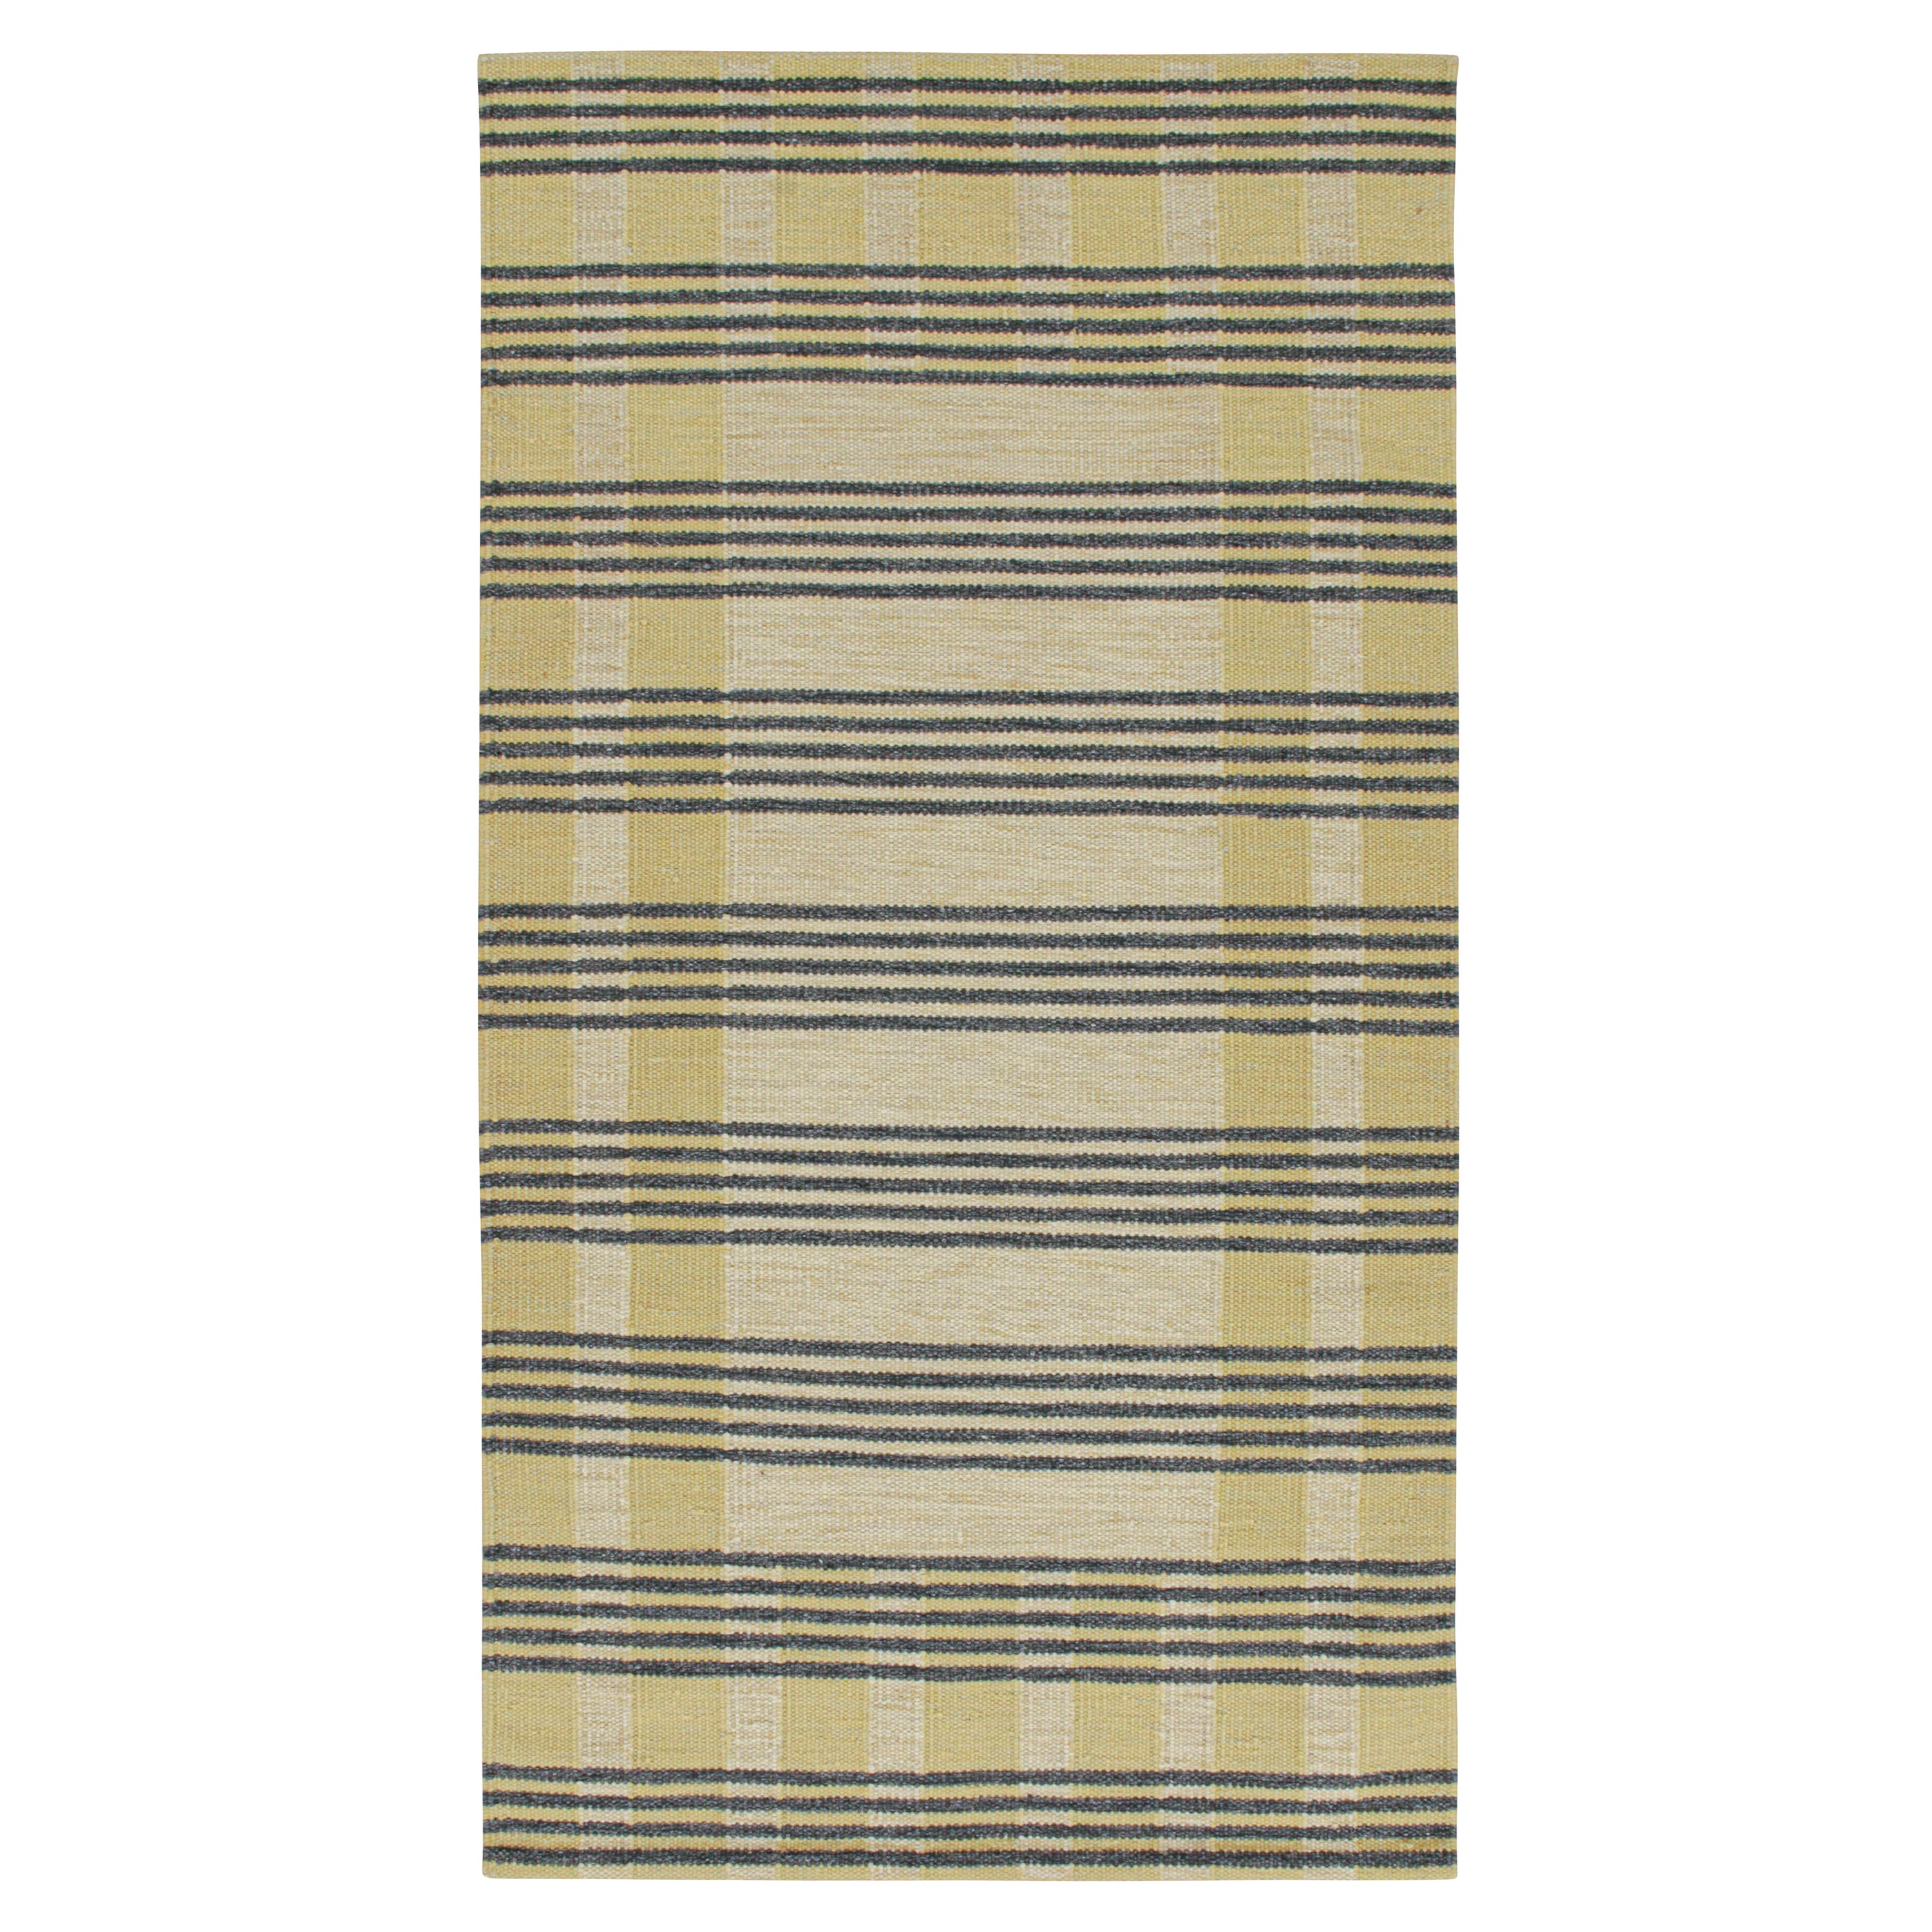 Rug & Kilim’s Scandinavian Style Kilim in Cream with Gray Stripes Patterns